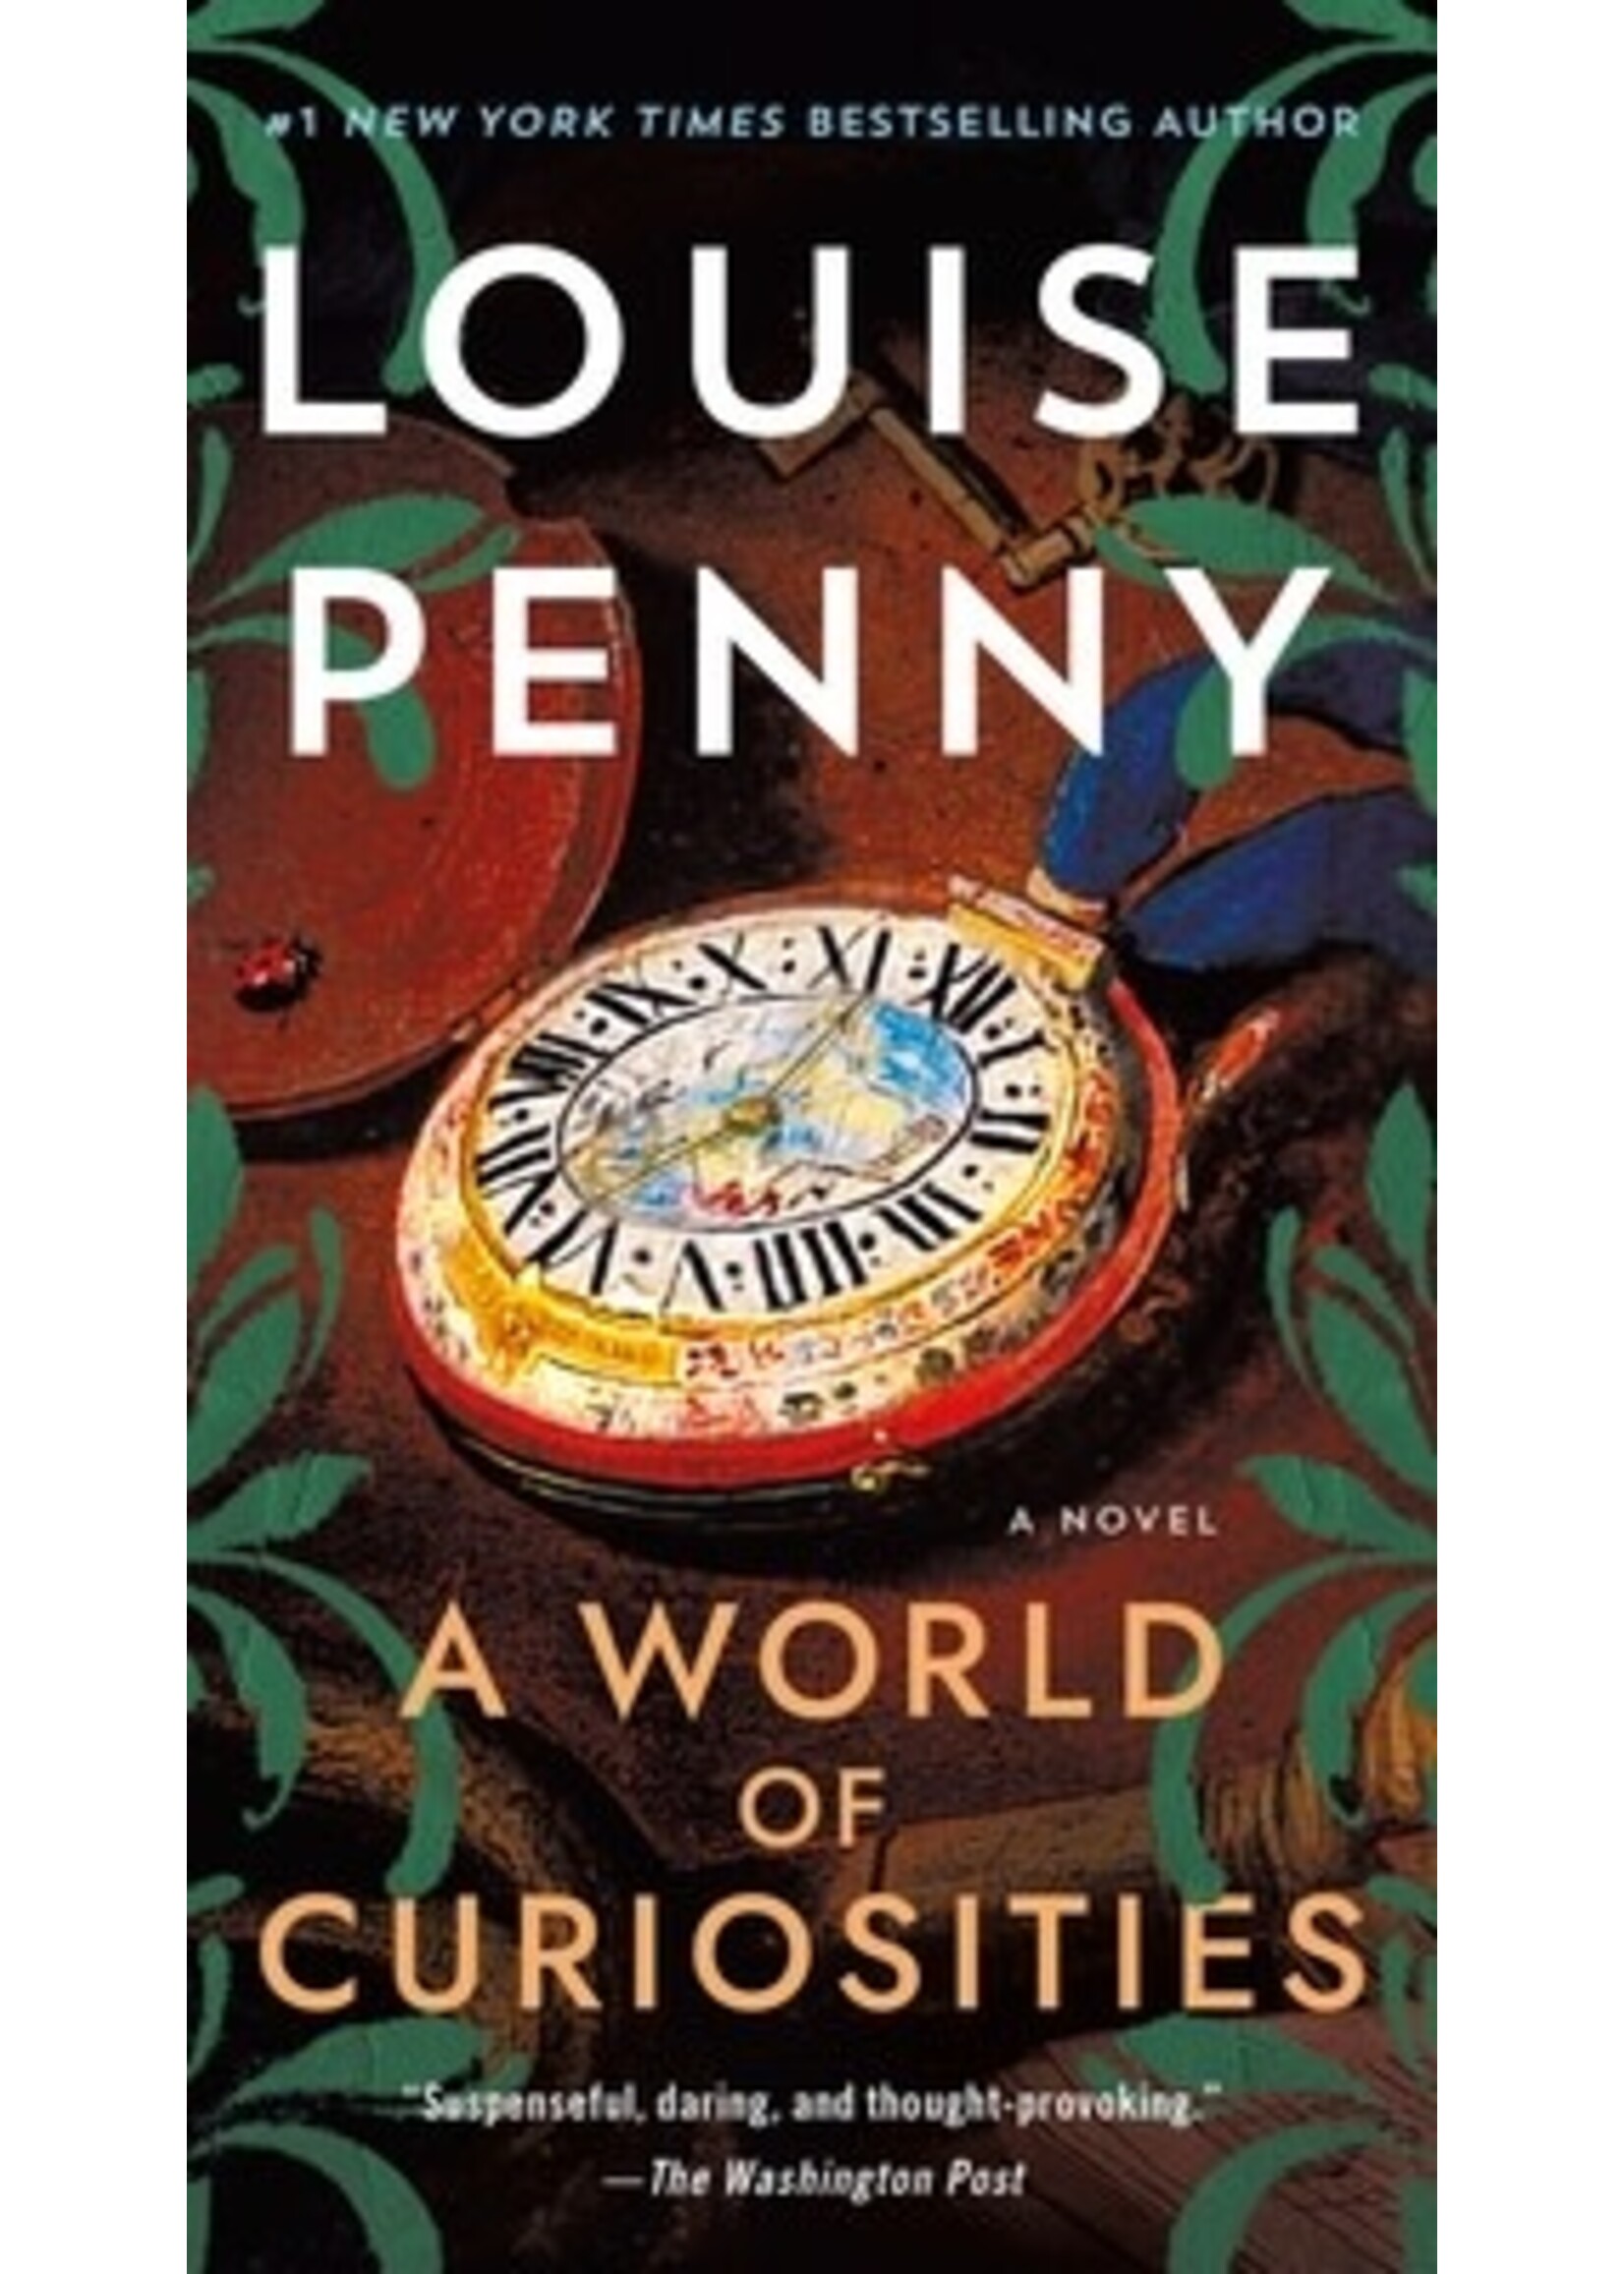 A World of Curiosities (Chief Inspector Armand Gamache #18) by Louise Penny